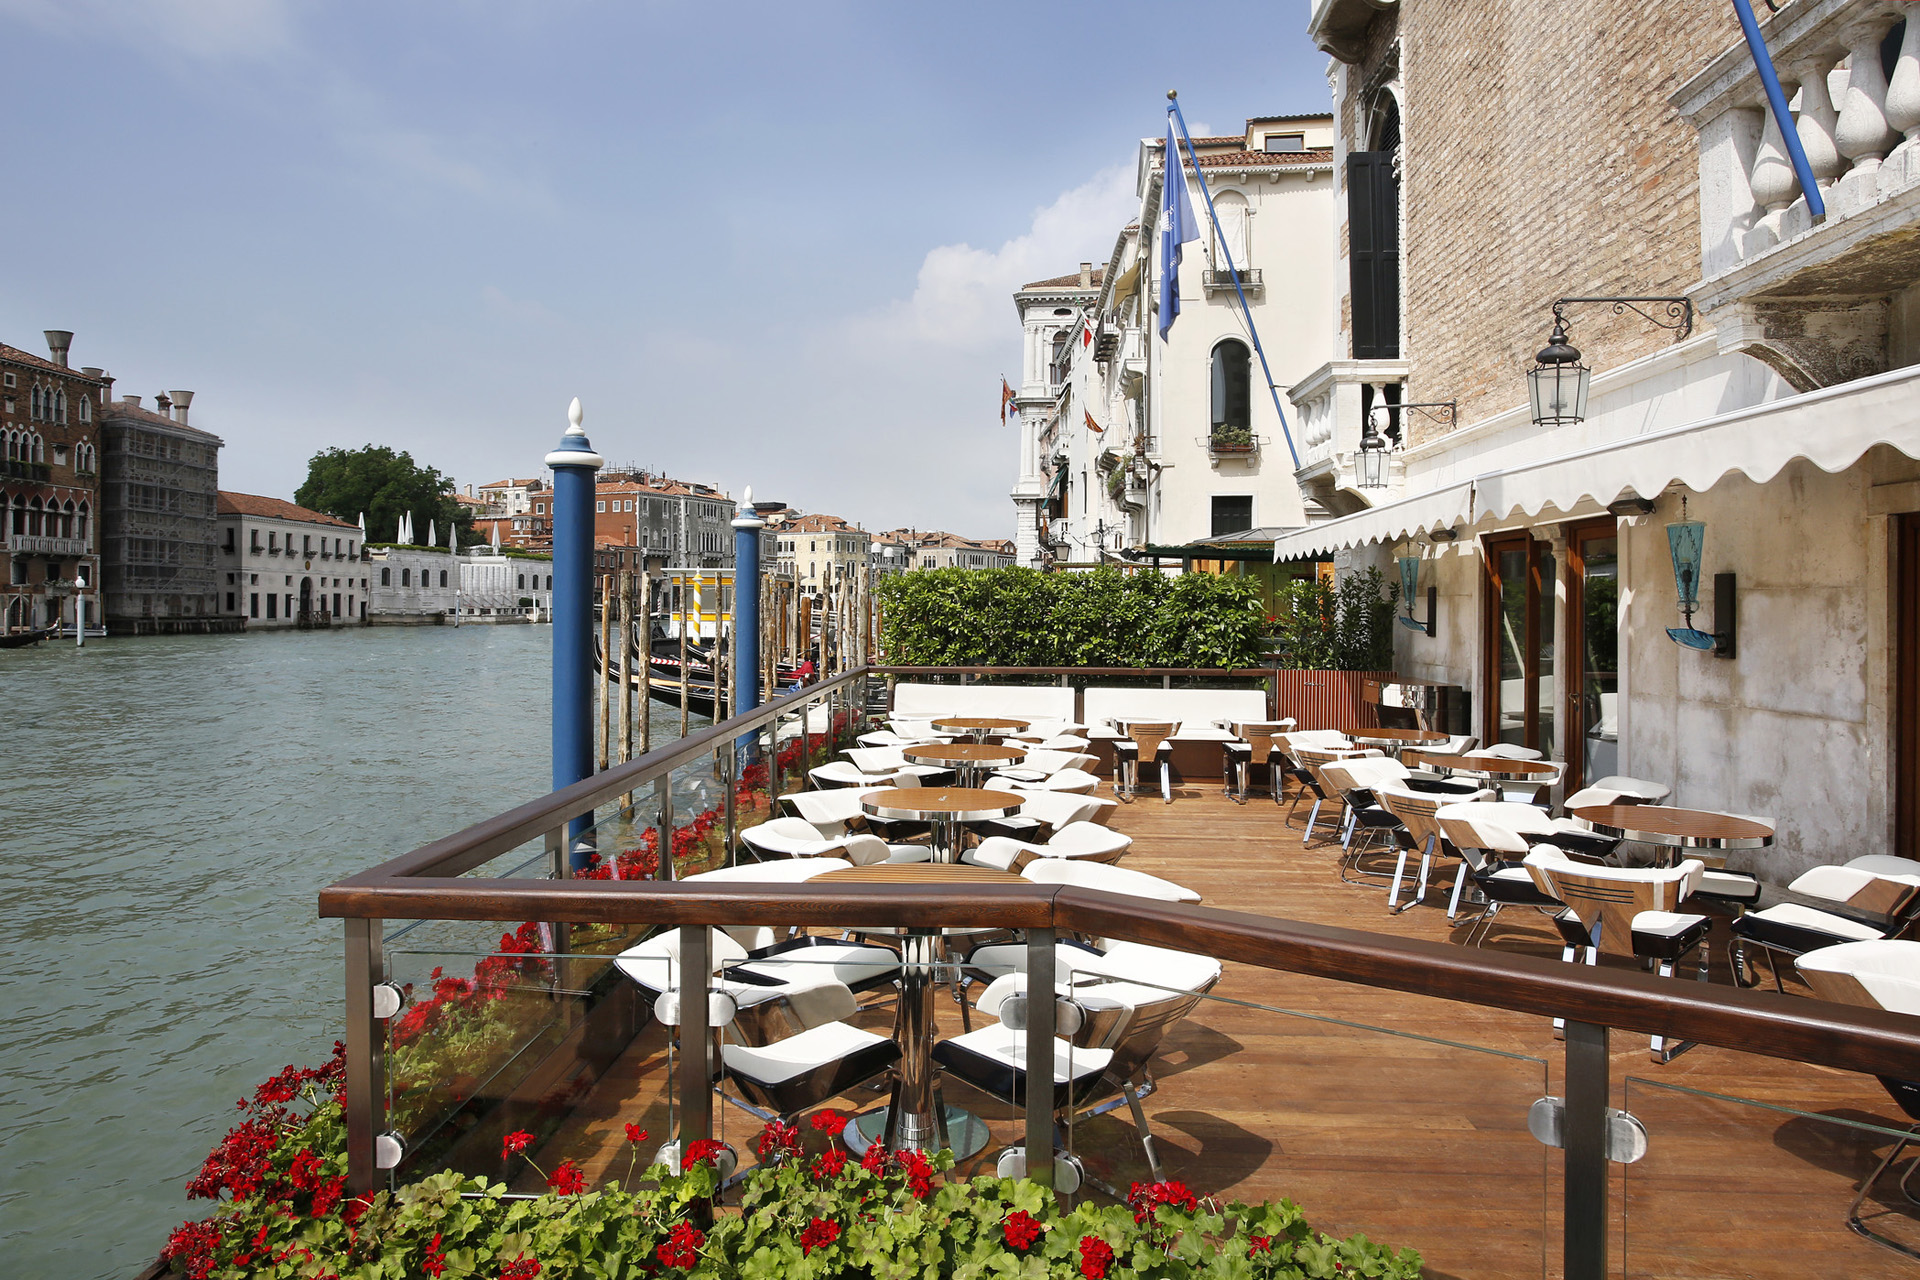 The Gritti Palace terrace in Venice